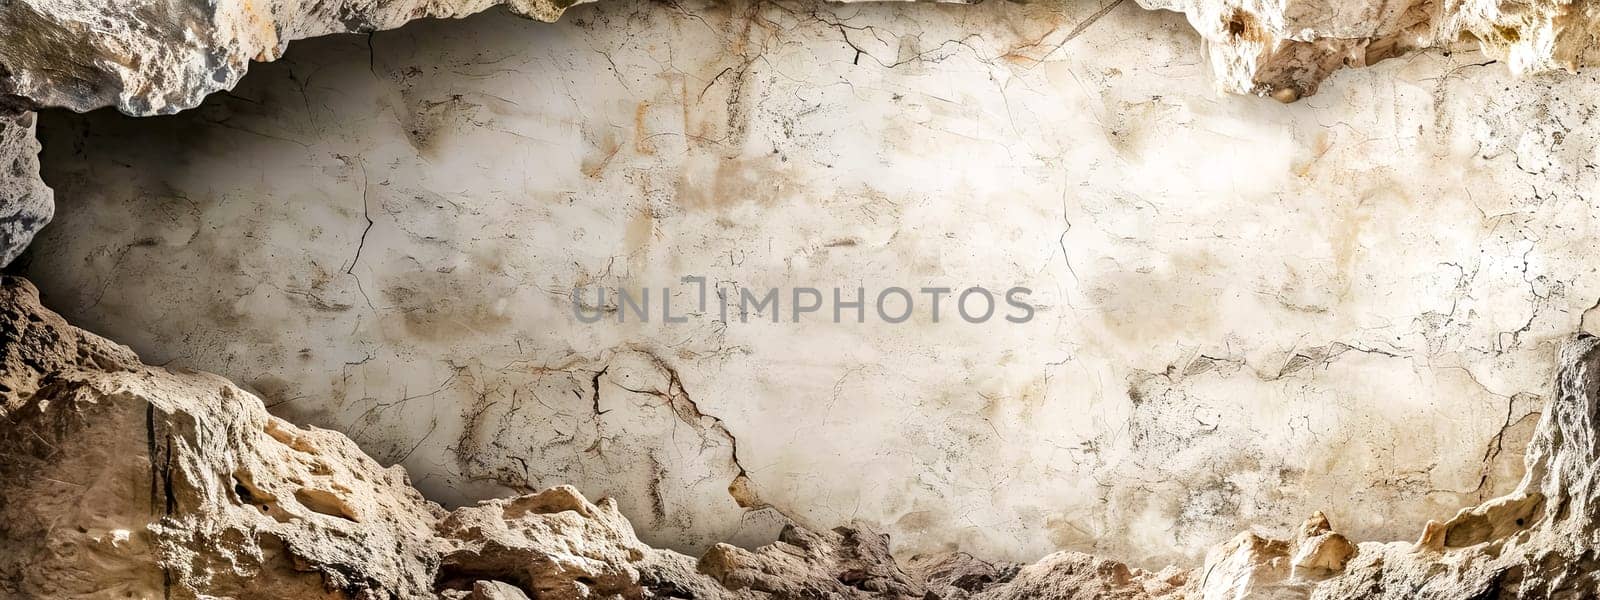 A panoramic view of a spacious cave interior with a rough, textured wall showcasing natural earth tones and subtle stone formations by Edophoto